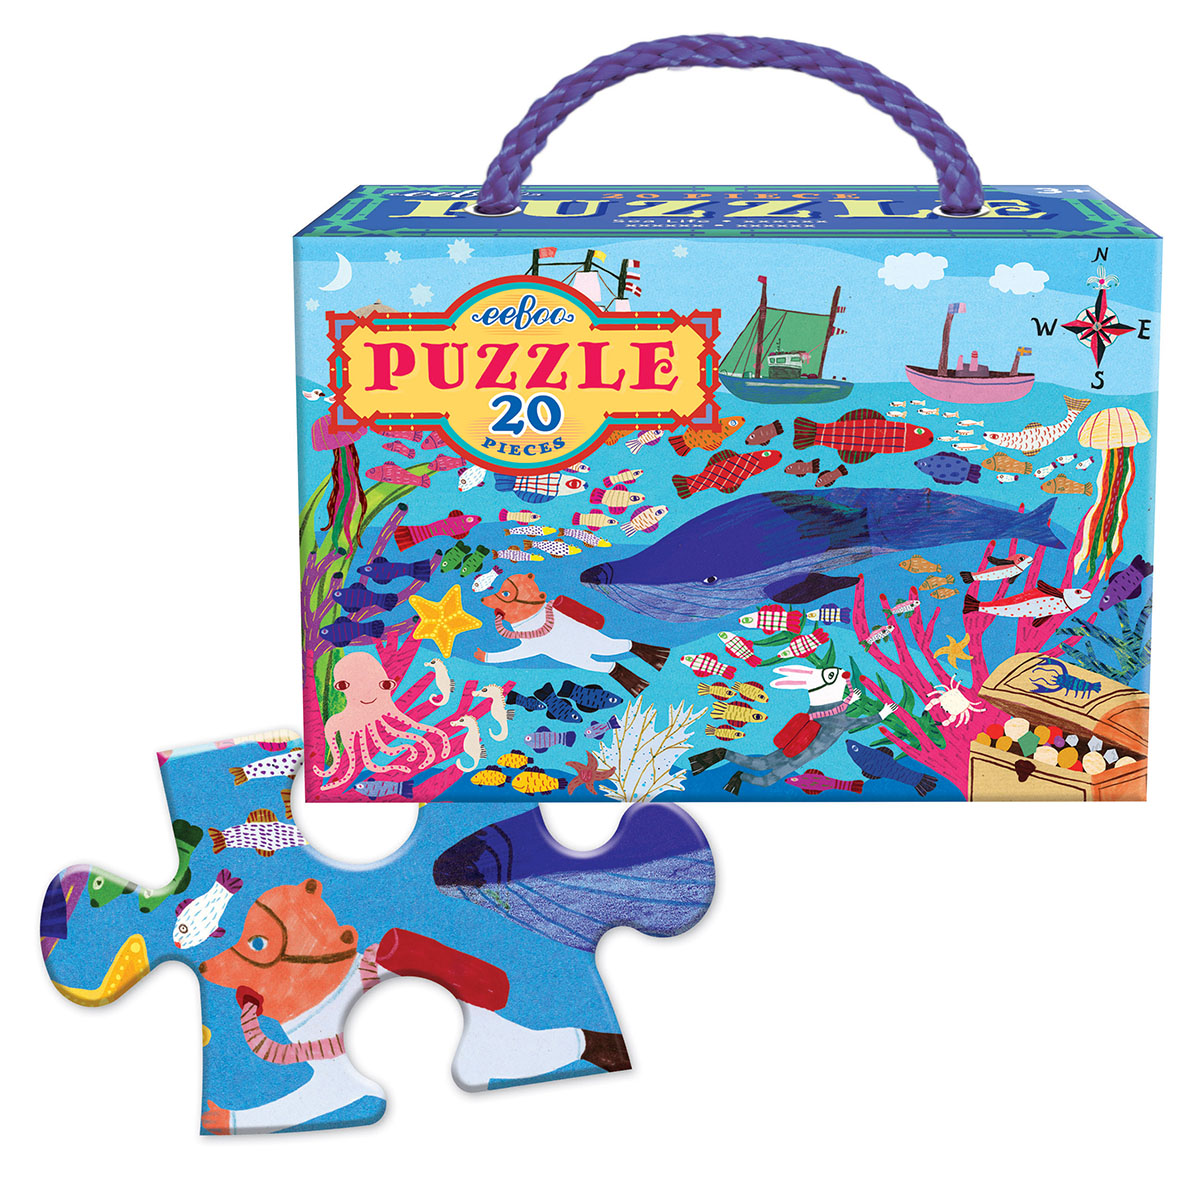 Tranquility Glow Beach & Ocean Jigsaw Puzzle By Puzzlelife